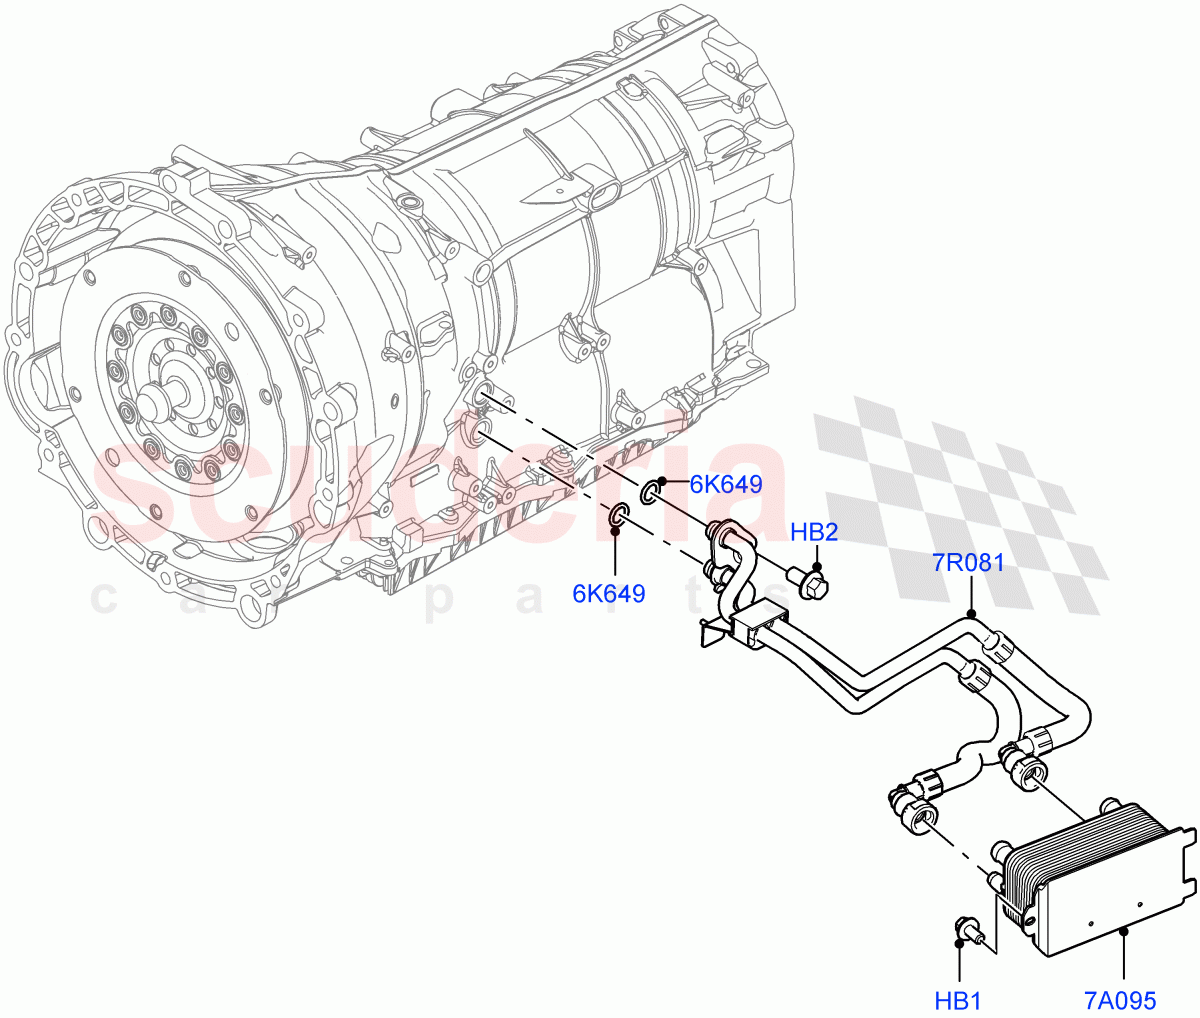 Transmission Cooling Systems(3.0L AJ20P6 Petrol High,8 Speed Auto Trans ZF 8HP76,3.0L AJ20D6 Diesel High)((V)FROMKA000001) of Land Rover Land Rover Range Rover Sport (2014+) [3.0 I6 Turbo Petrol AJ20P6]